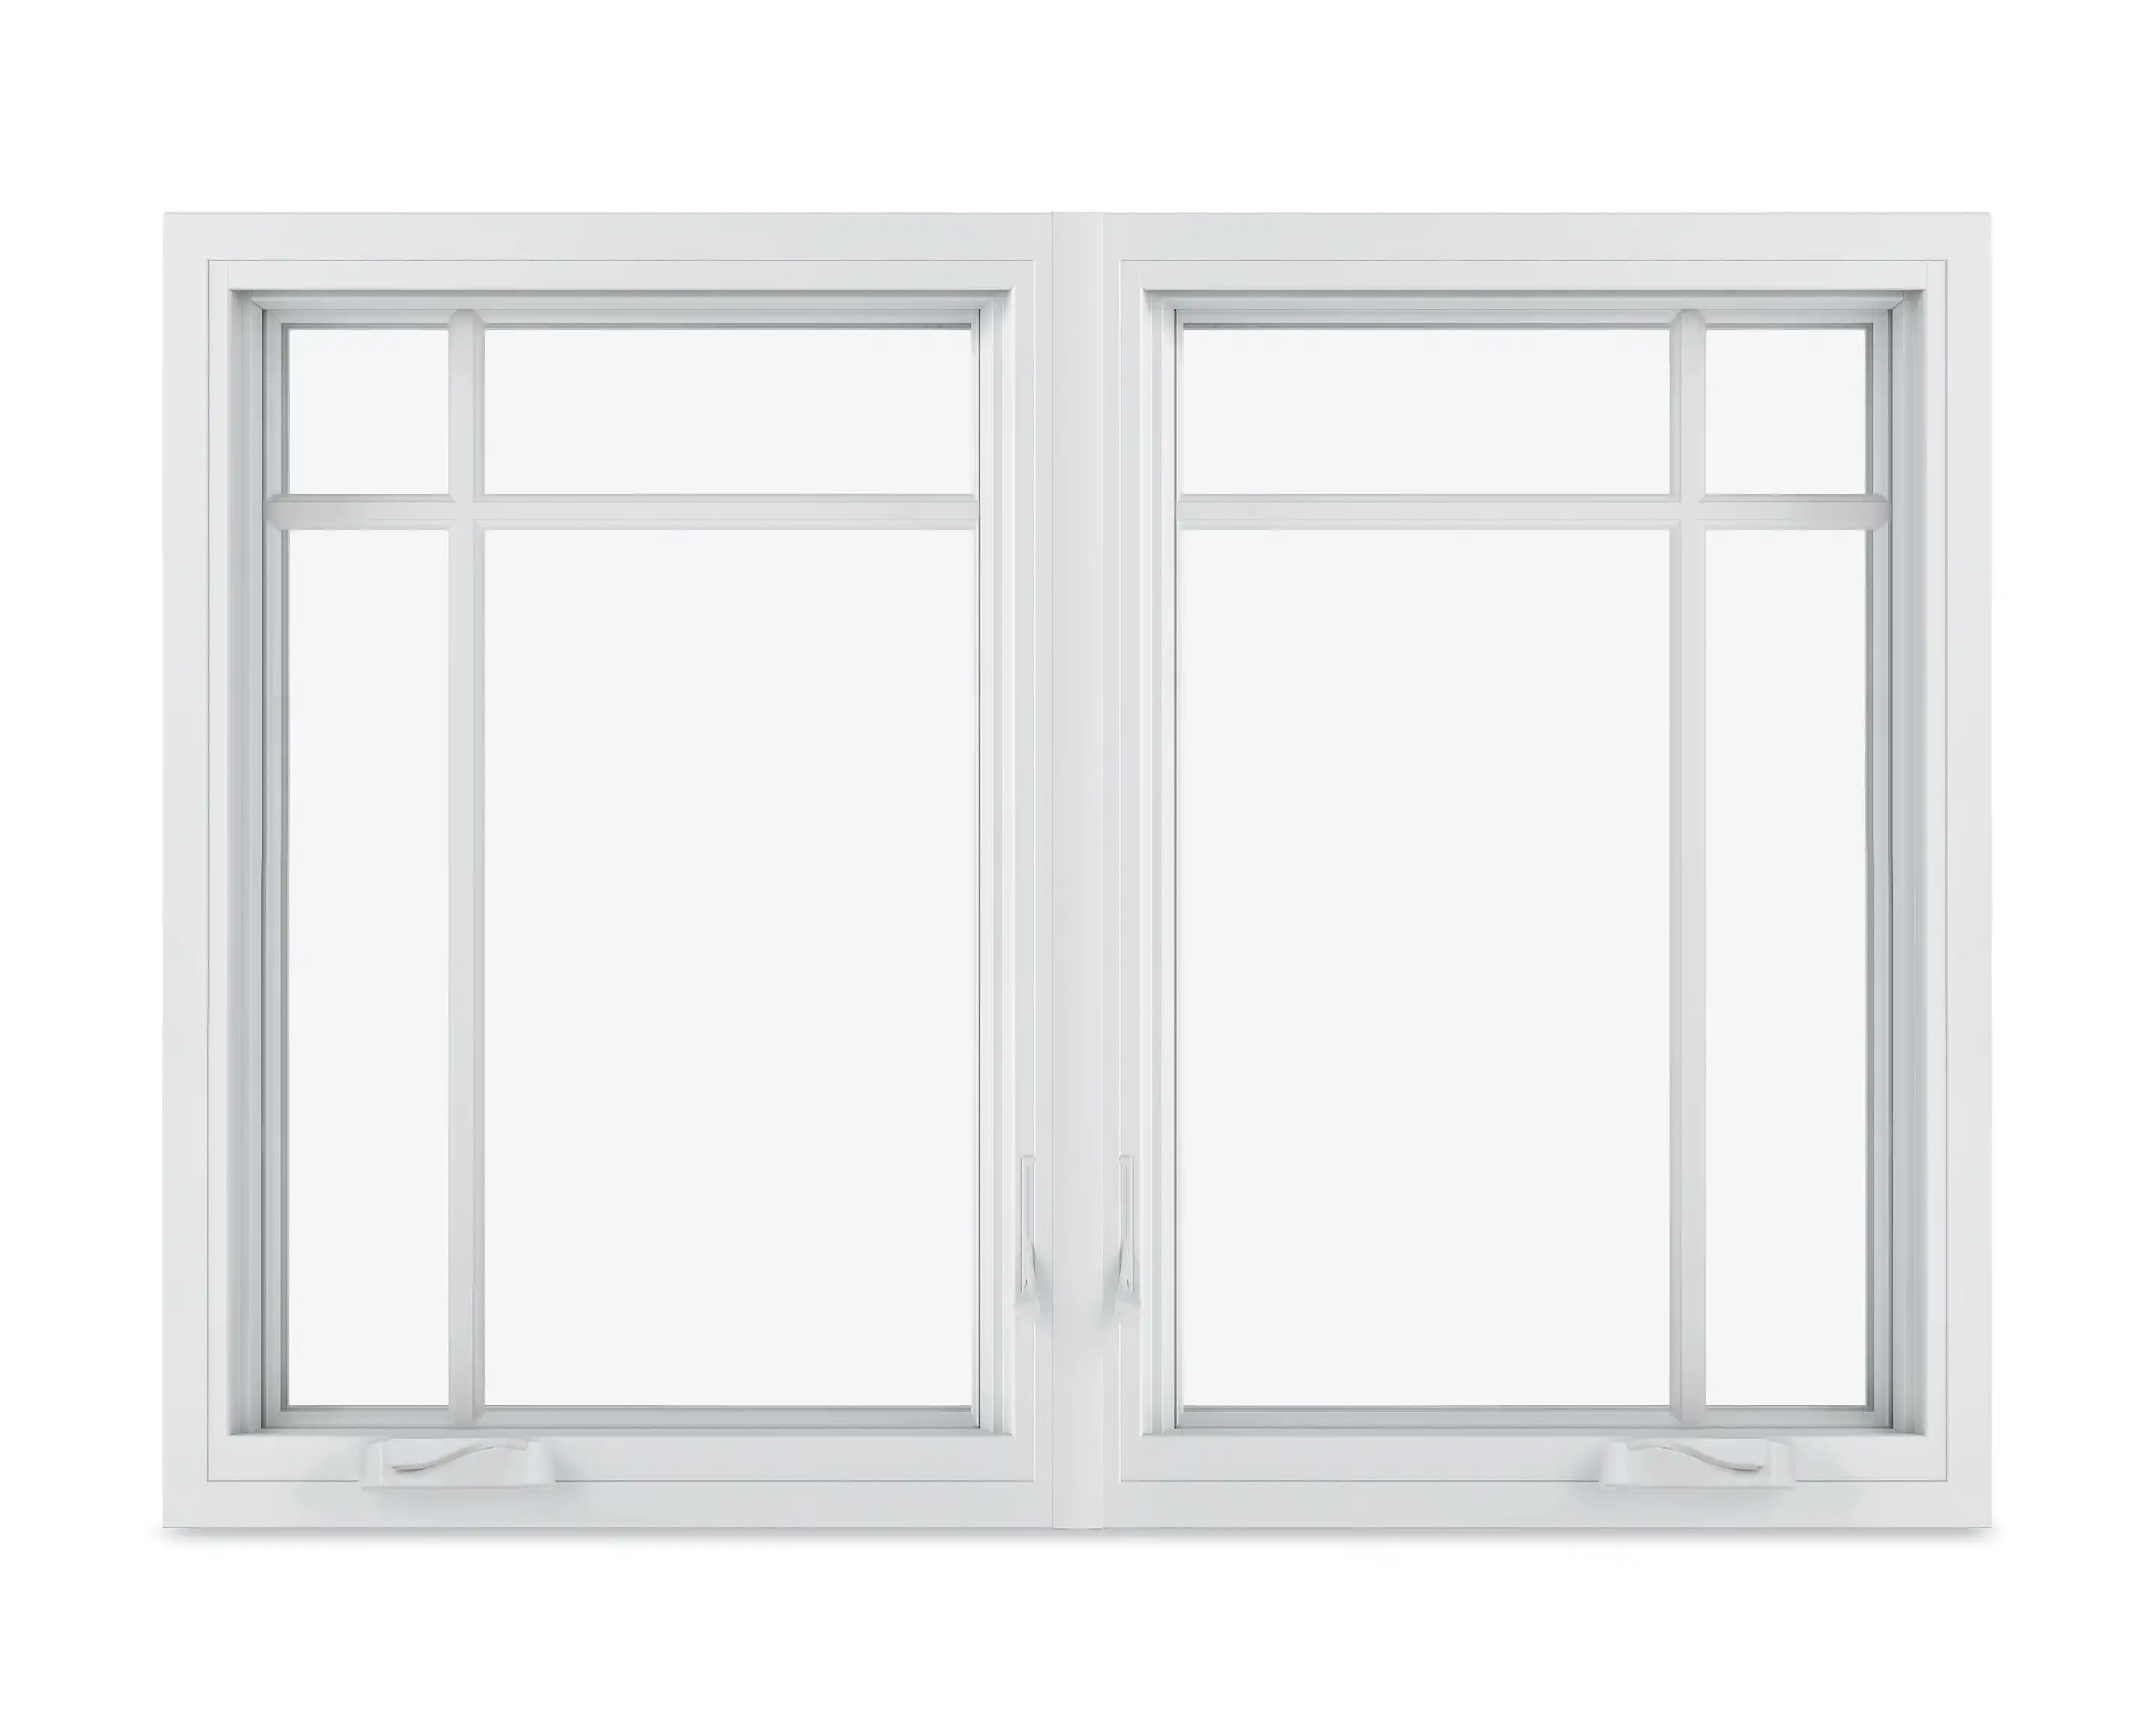 Marvin Replacement Casement Windows with Prairie Two-Wide Divided Lites.